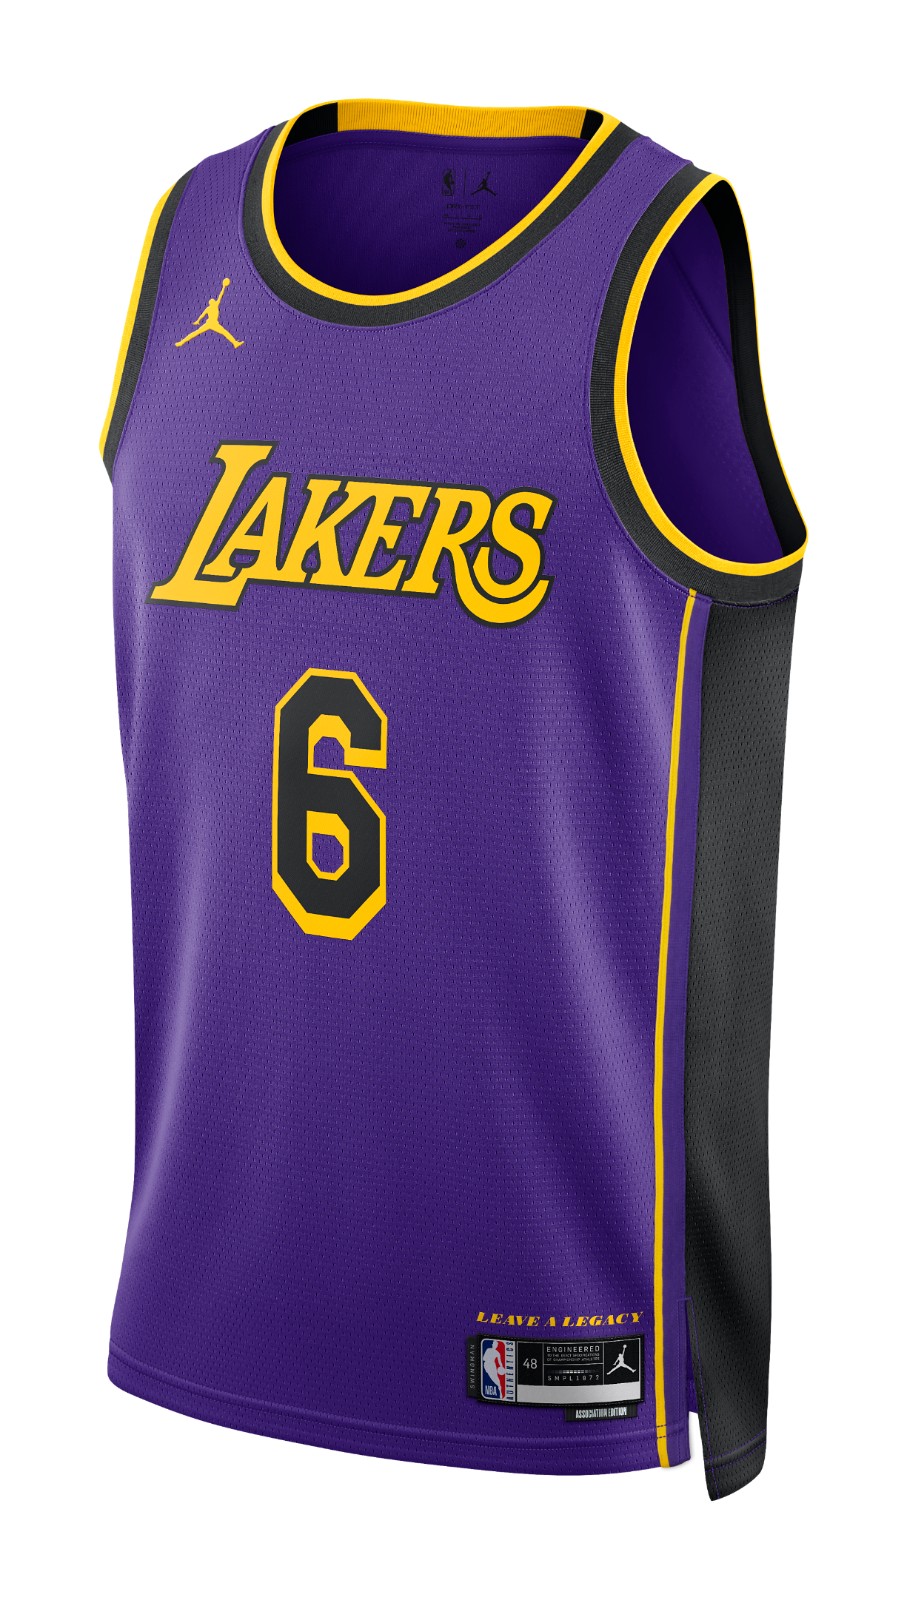 los angeles lakers 23 jersey